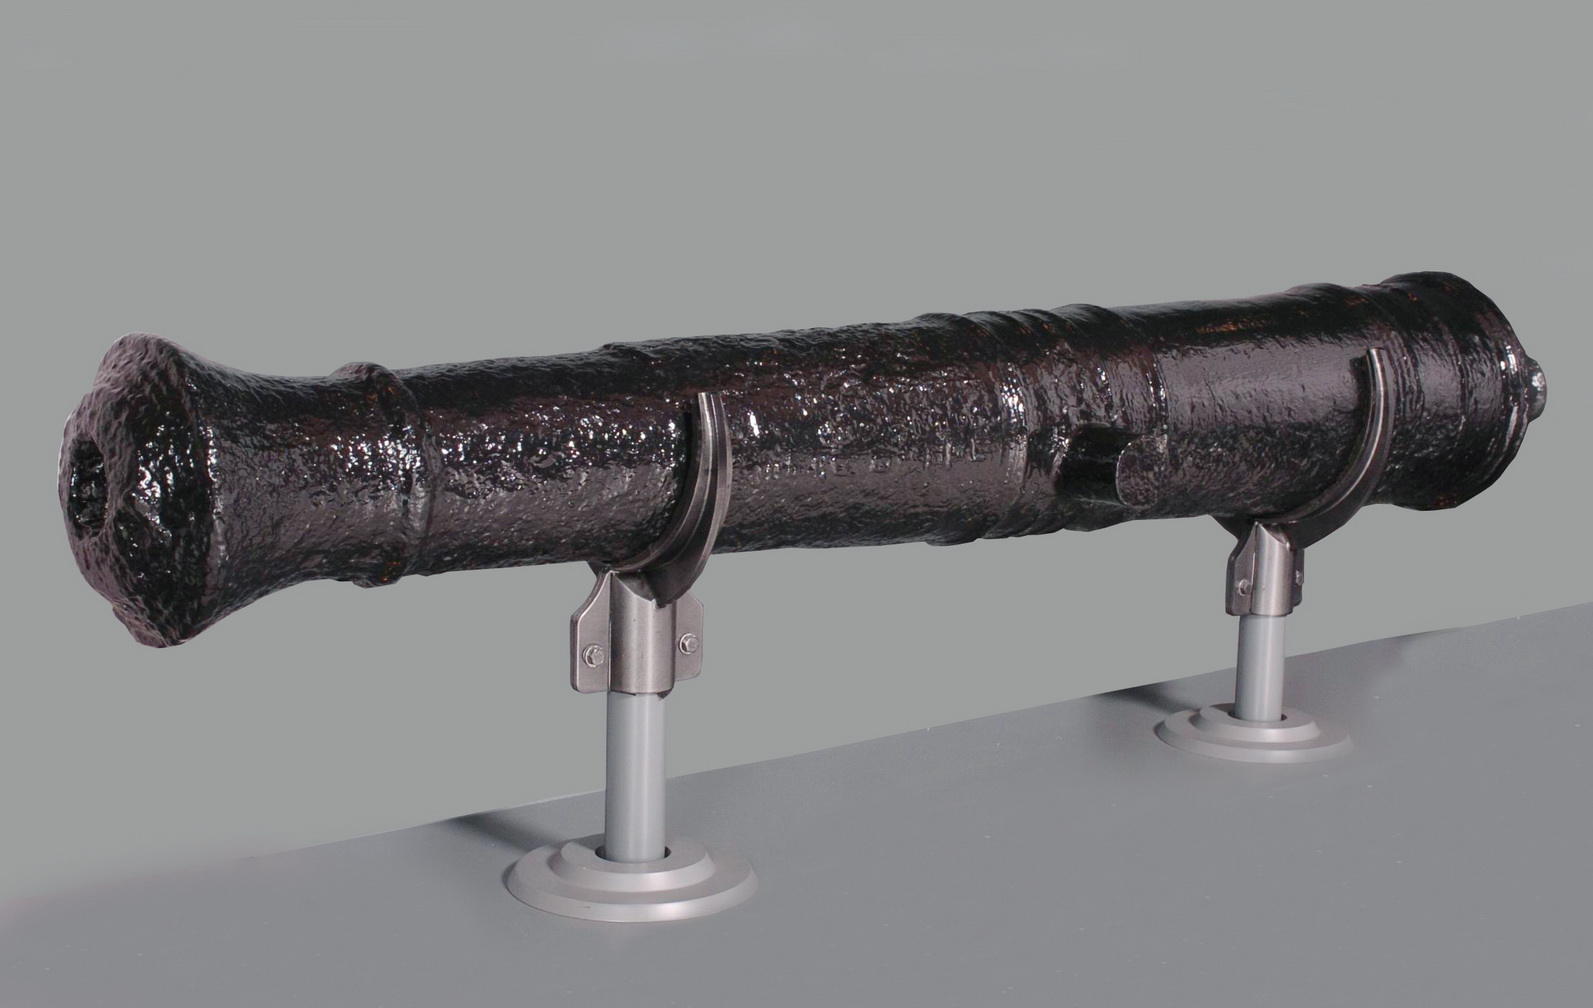 Cannon barrel casted in 1650 of the Southern Ming dynasty. It was used to resist the southward invasion of the Qing troops.